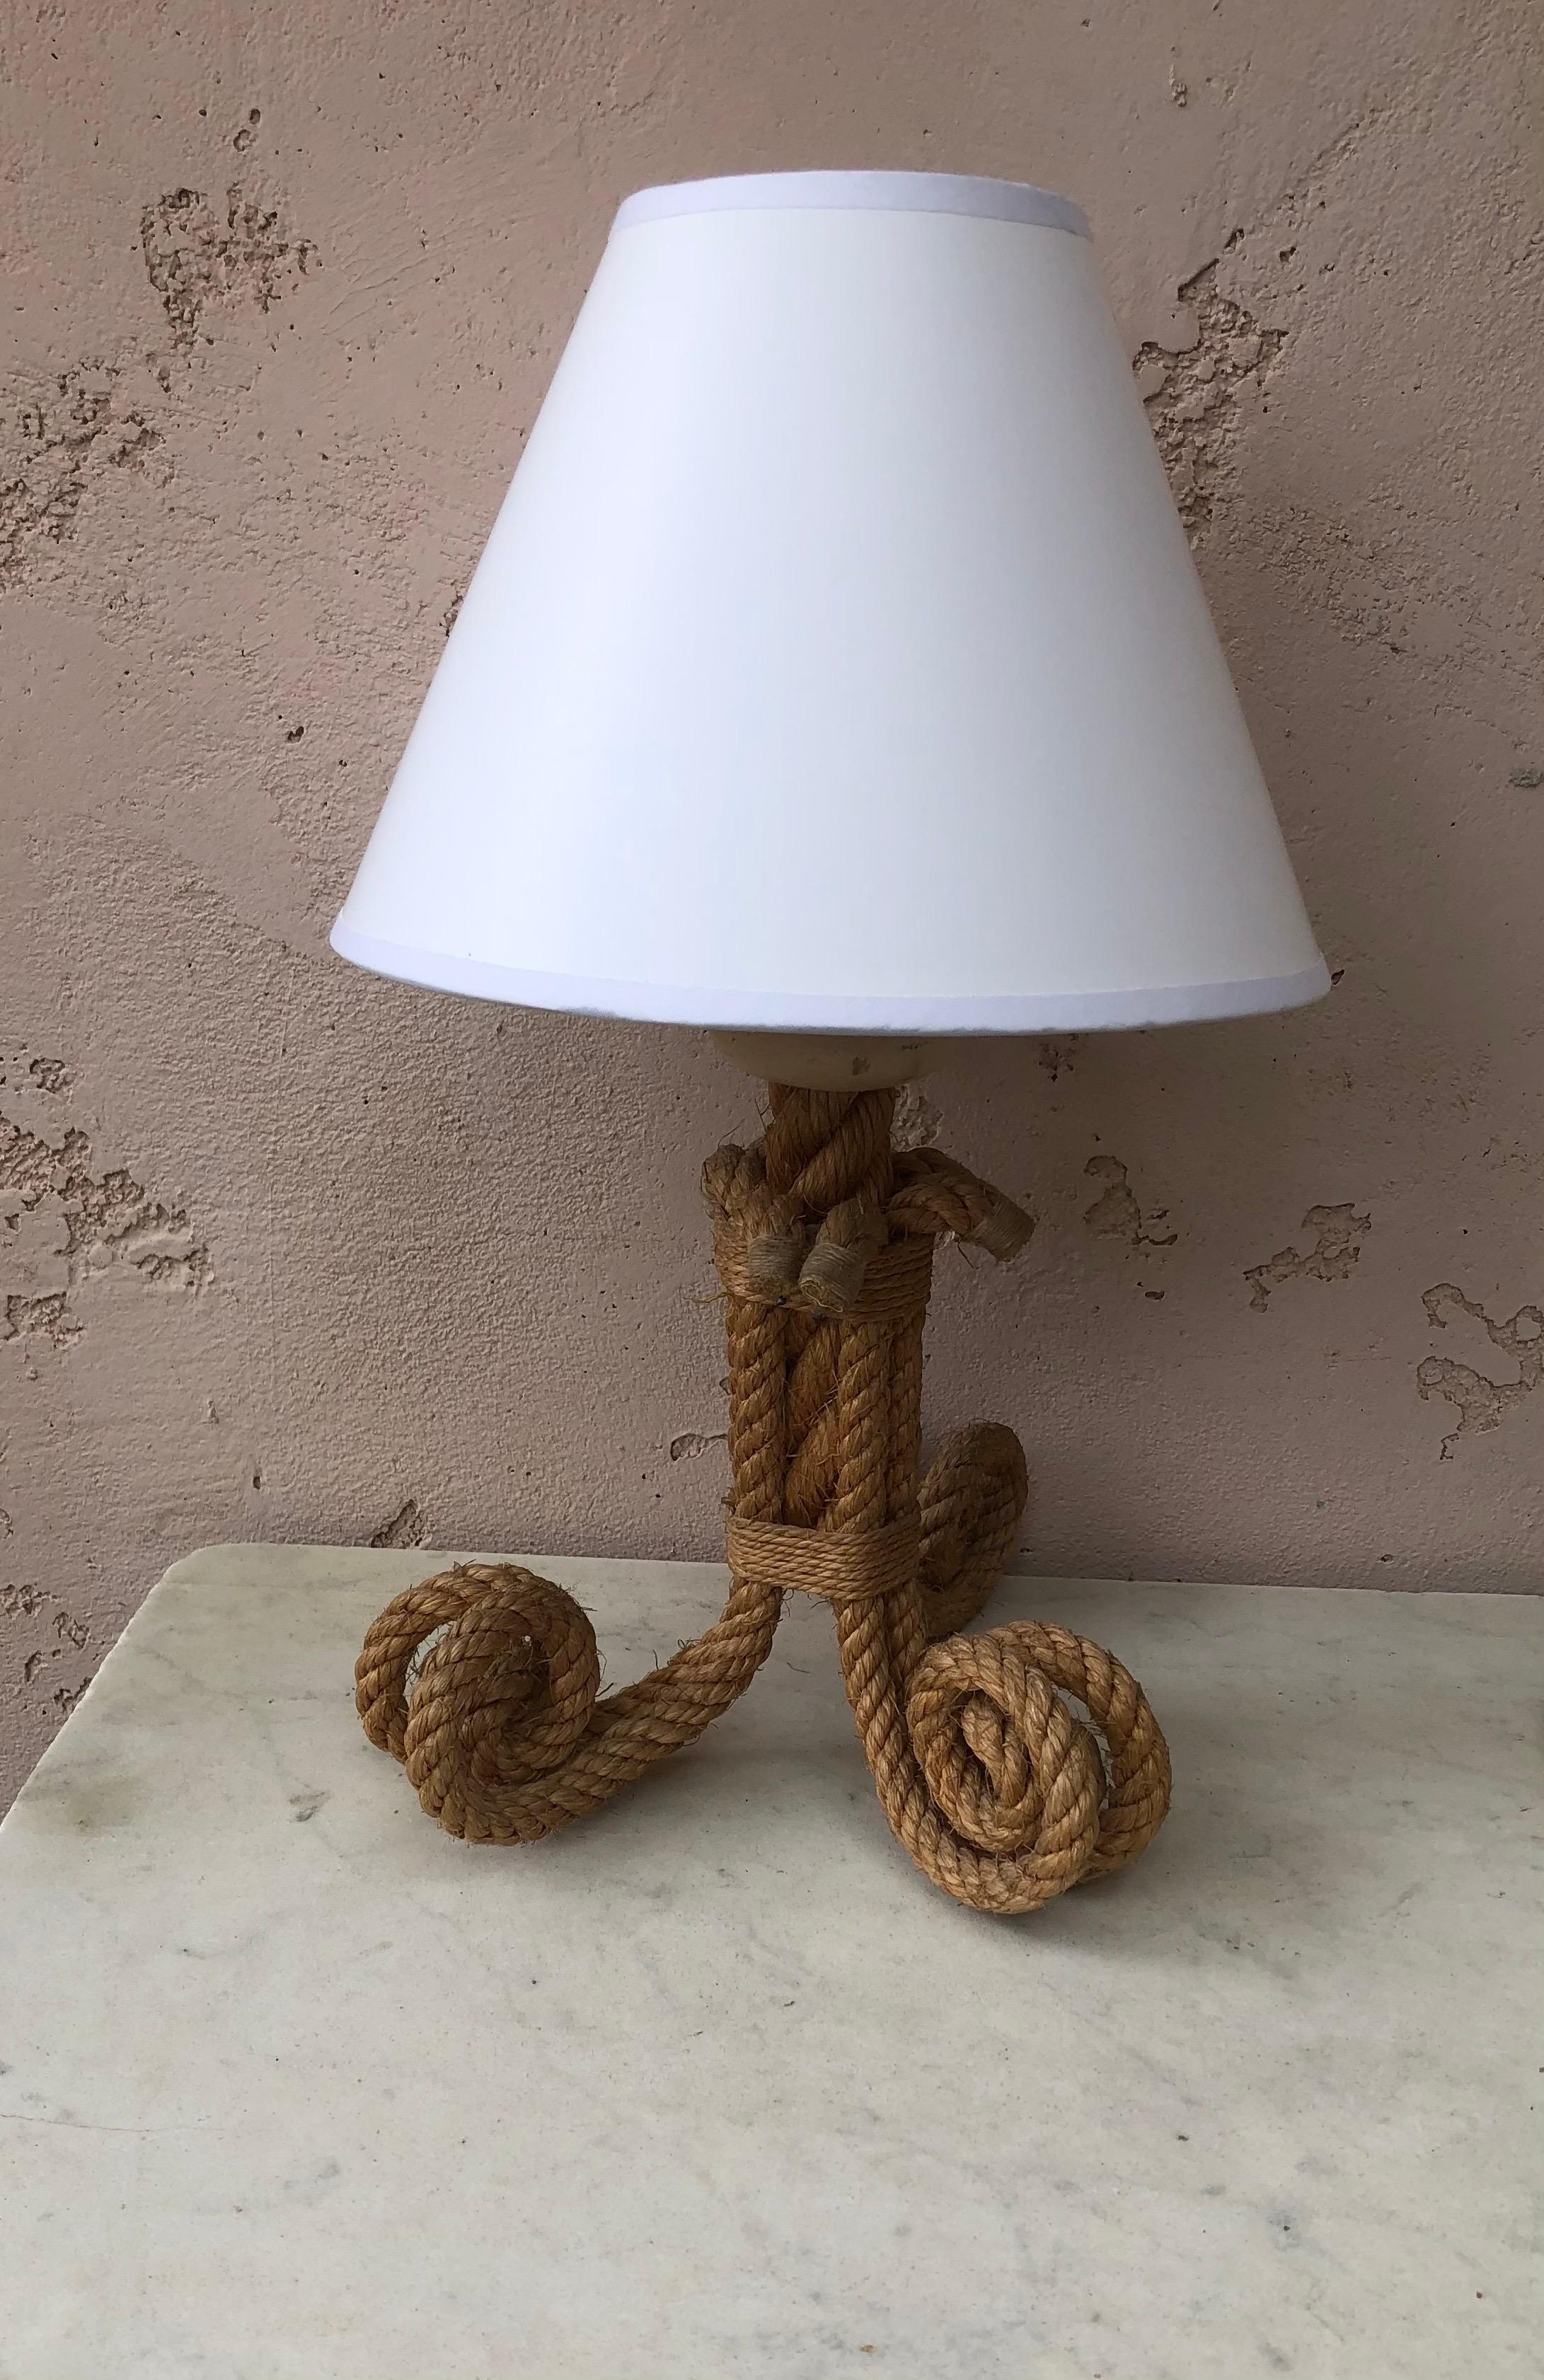 Mid century rope lamp by Audoux Minet.
Measures: Height / 15.3 inches.
Included shade diameter 6.5 inches.